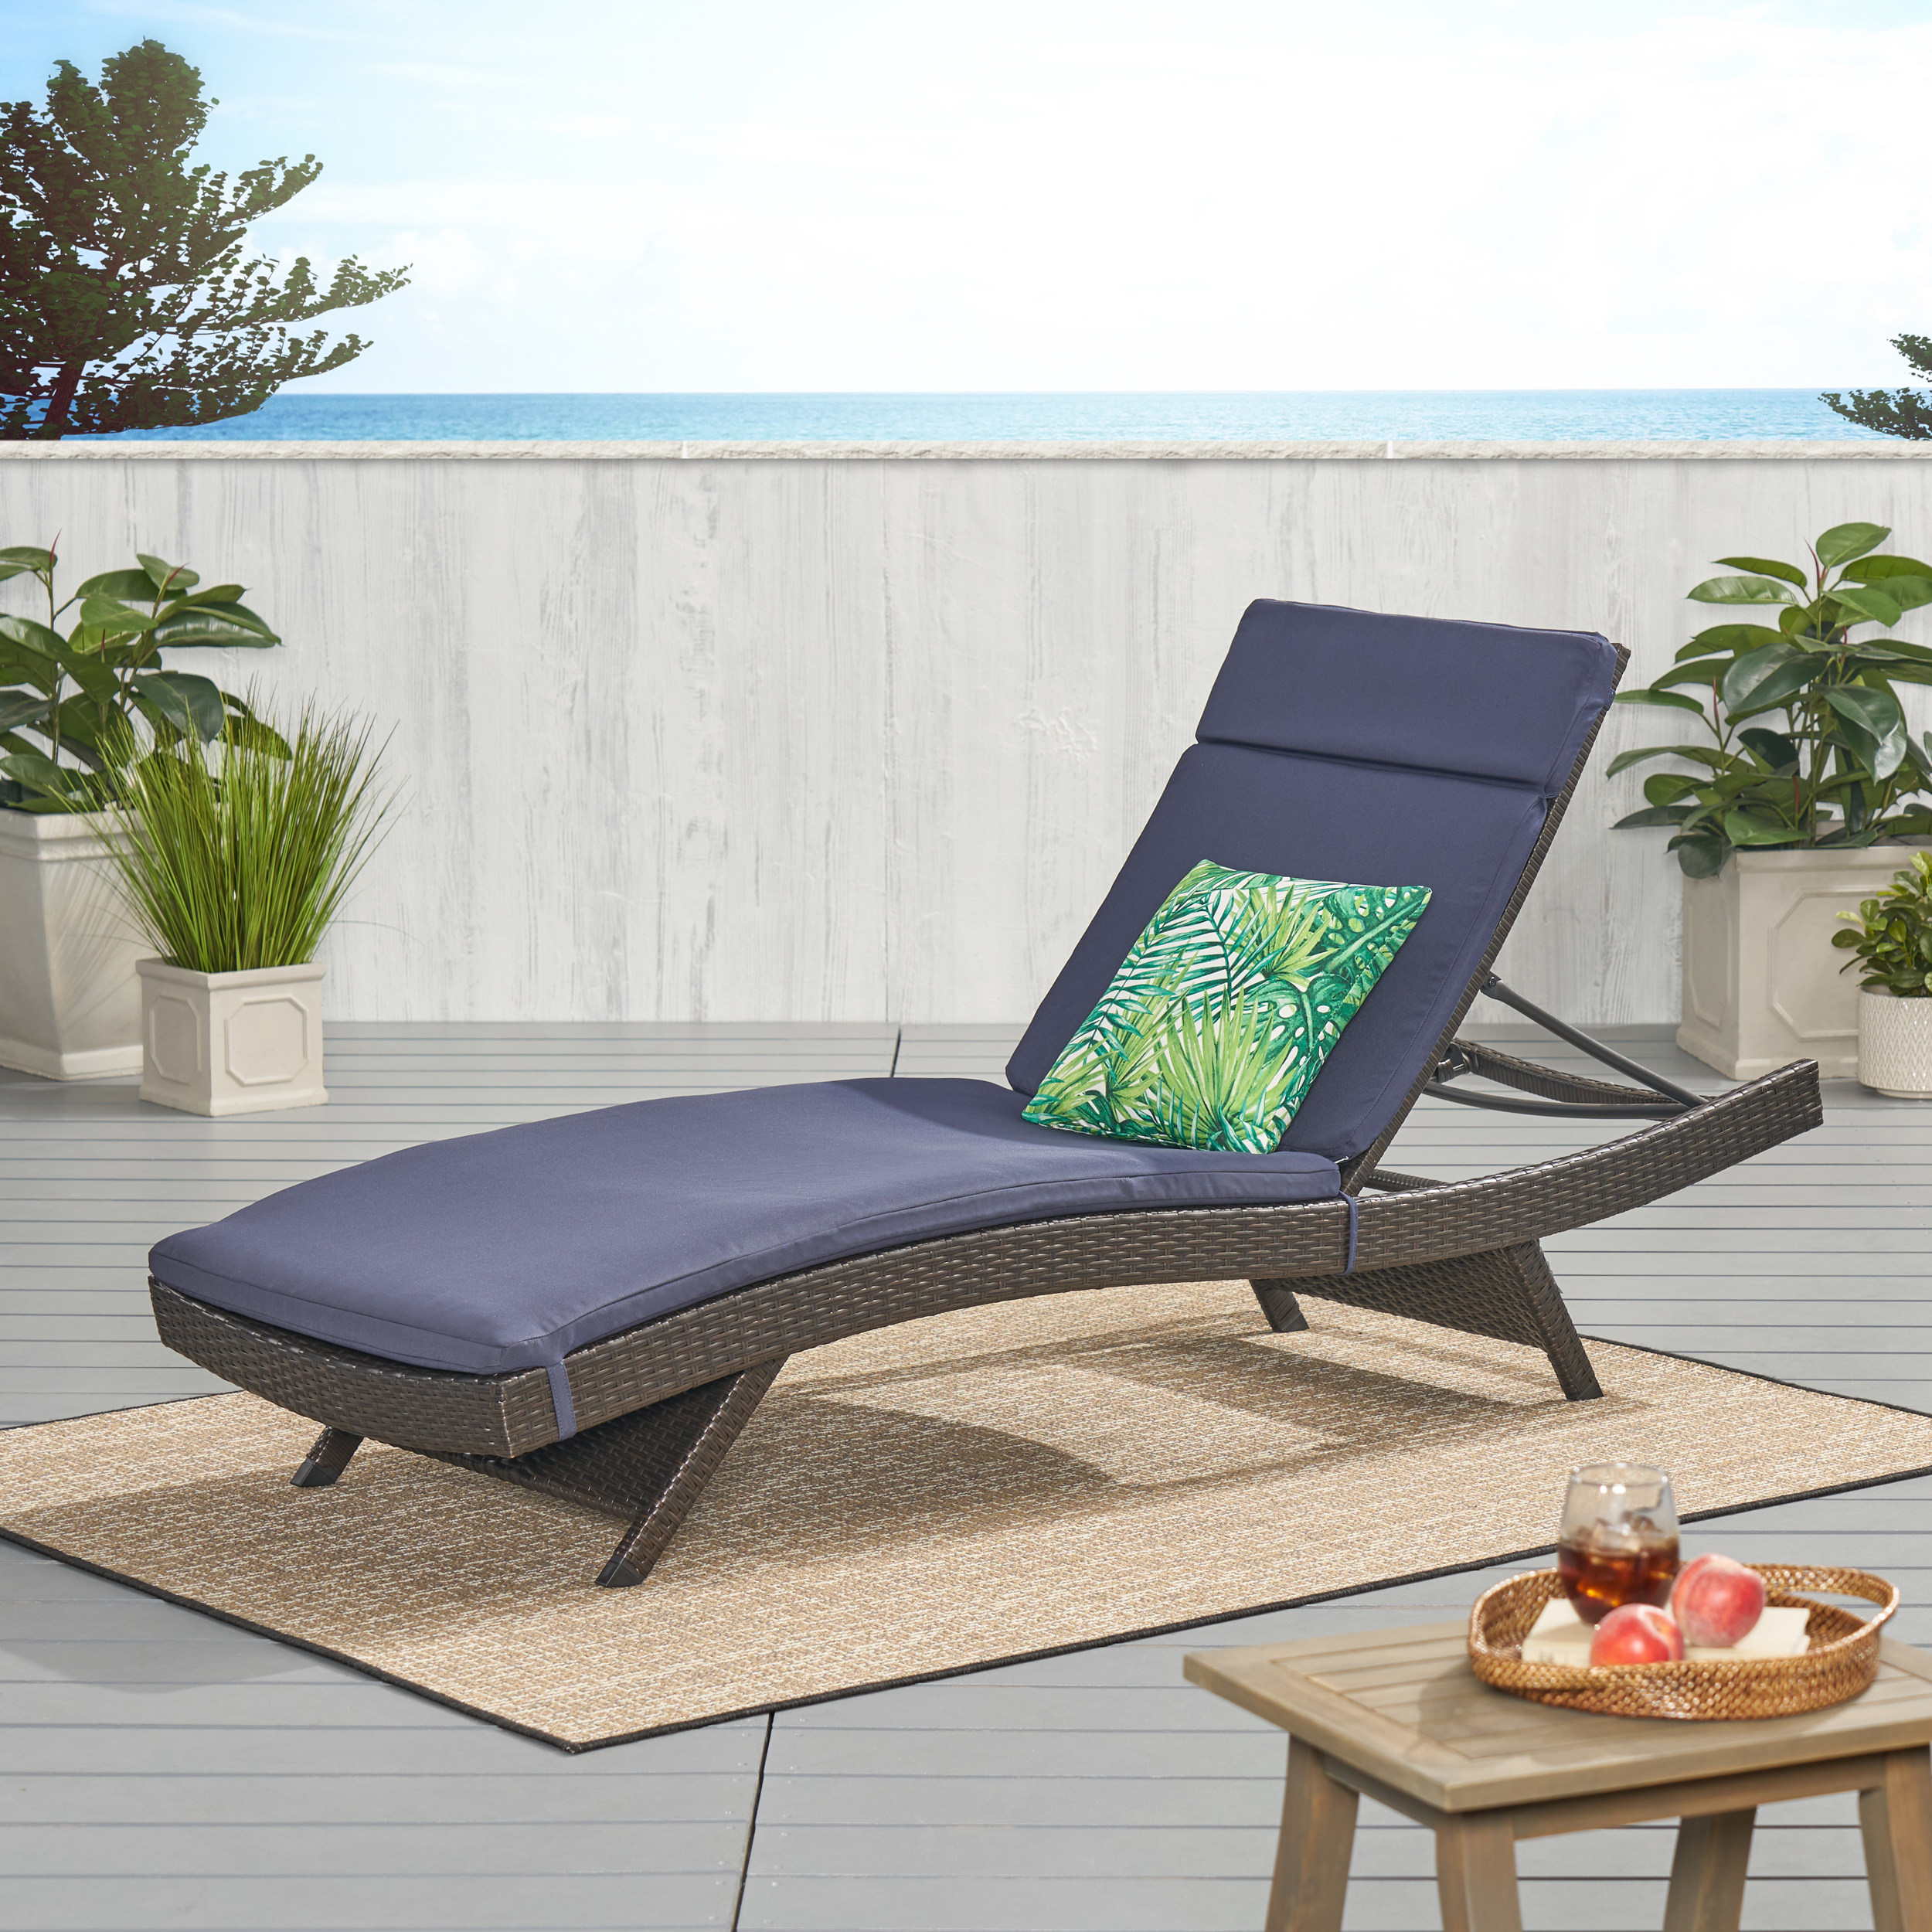 Lakeport Outdoor Adjustable Chaise Lounge Chair With Cushion - Jungle Green Cushion